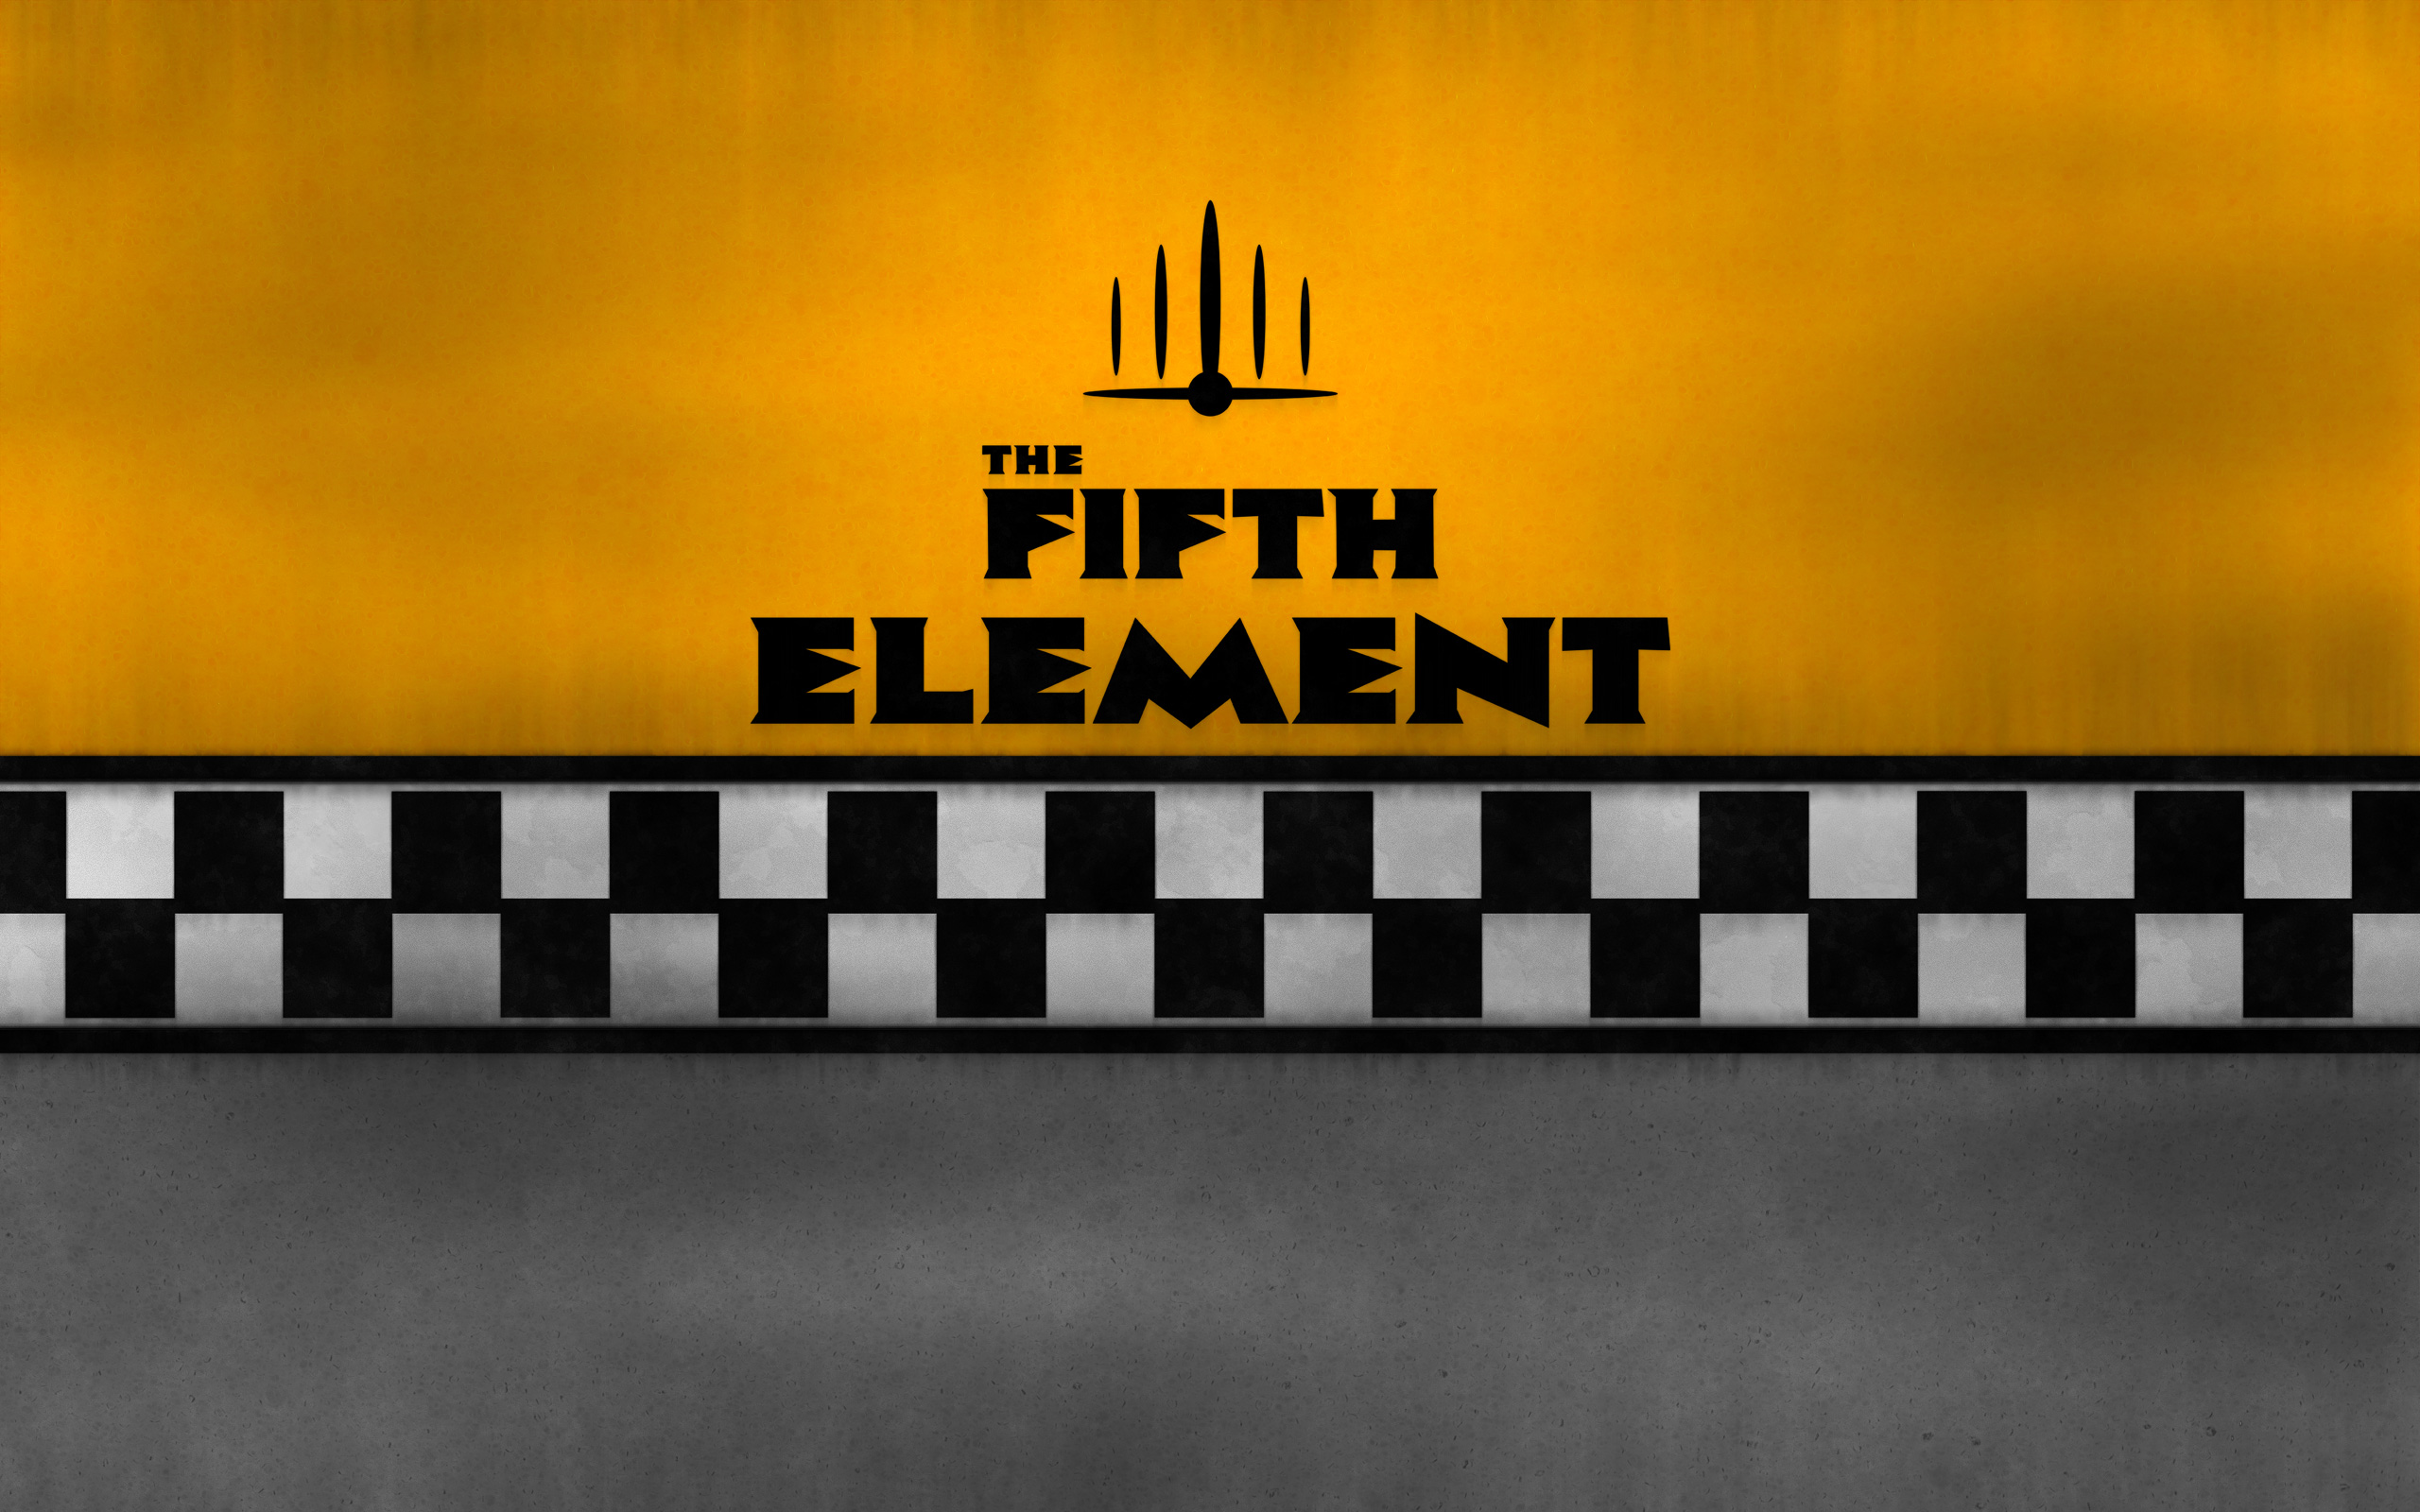 the fifth element, movie